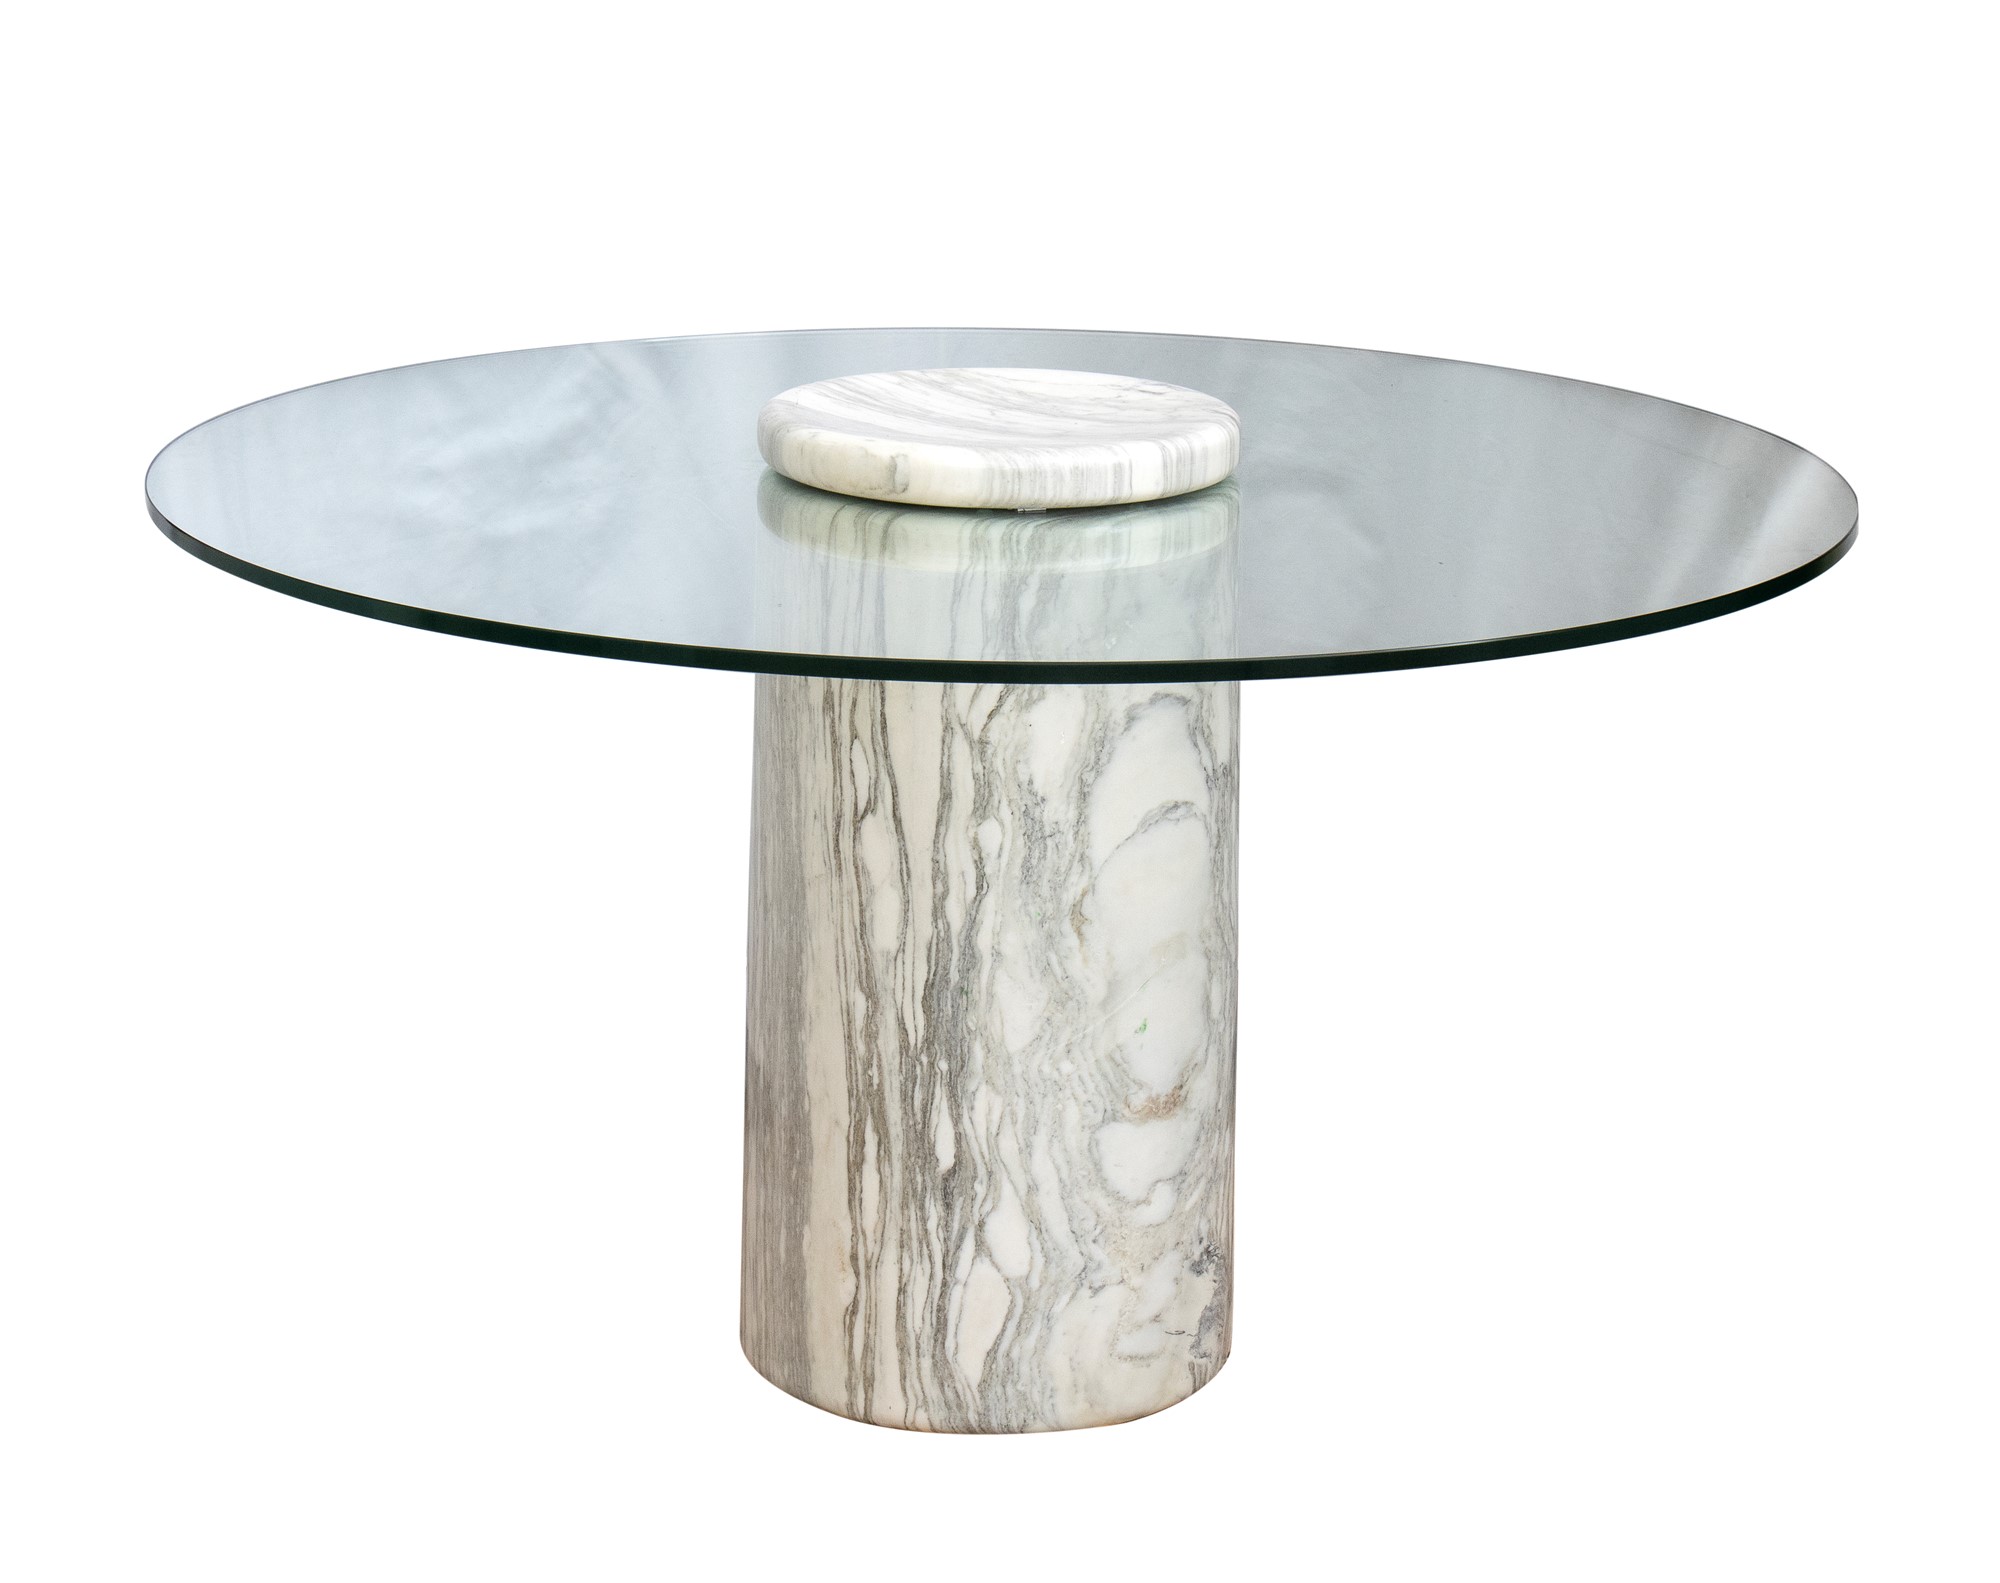 Angelo Mangiarotti Castore table in white marble and glass top - Image 3 of 7